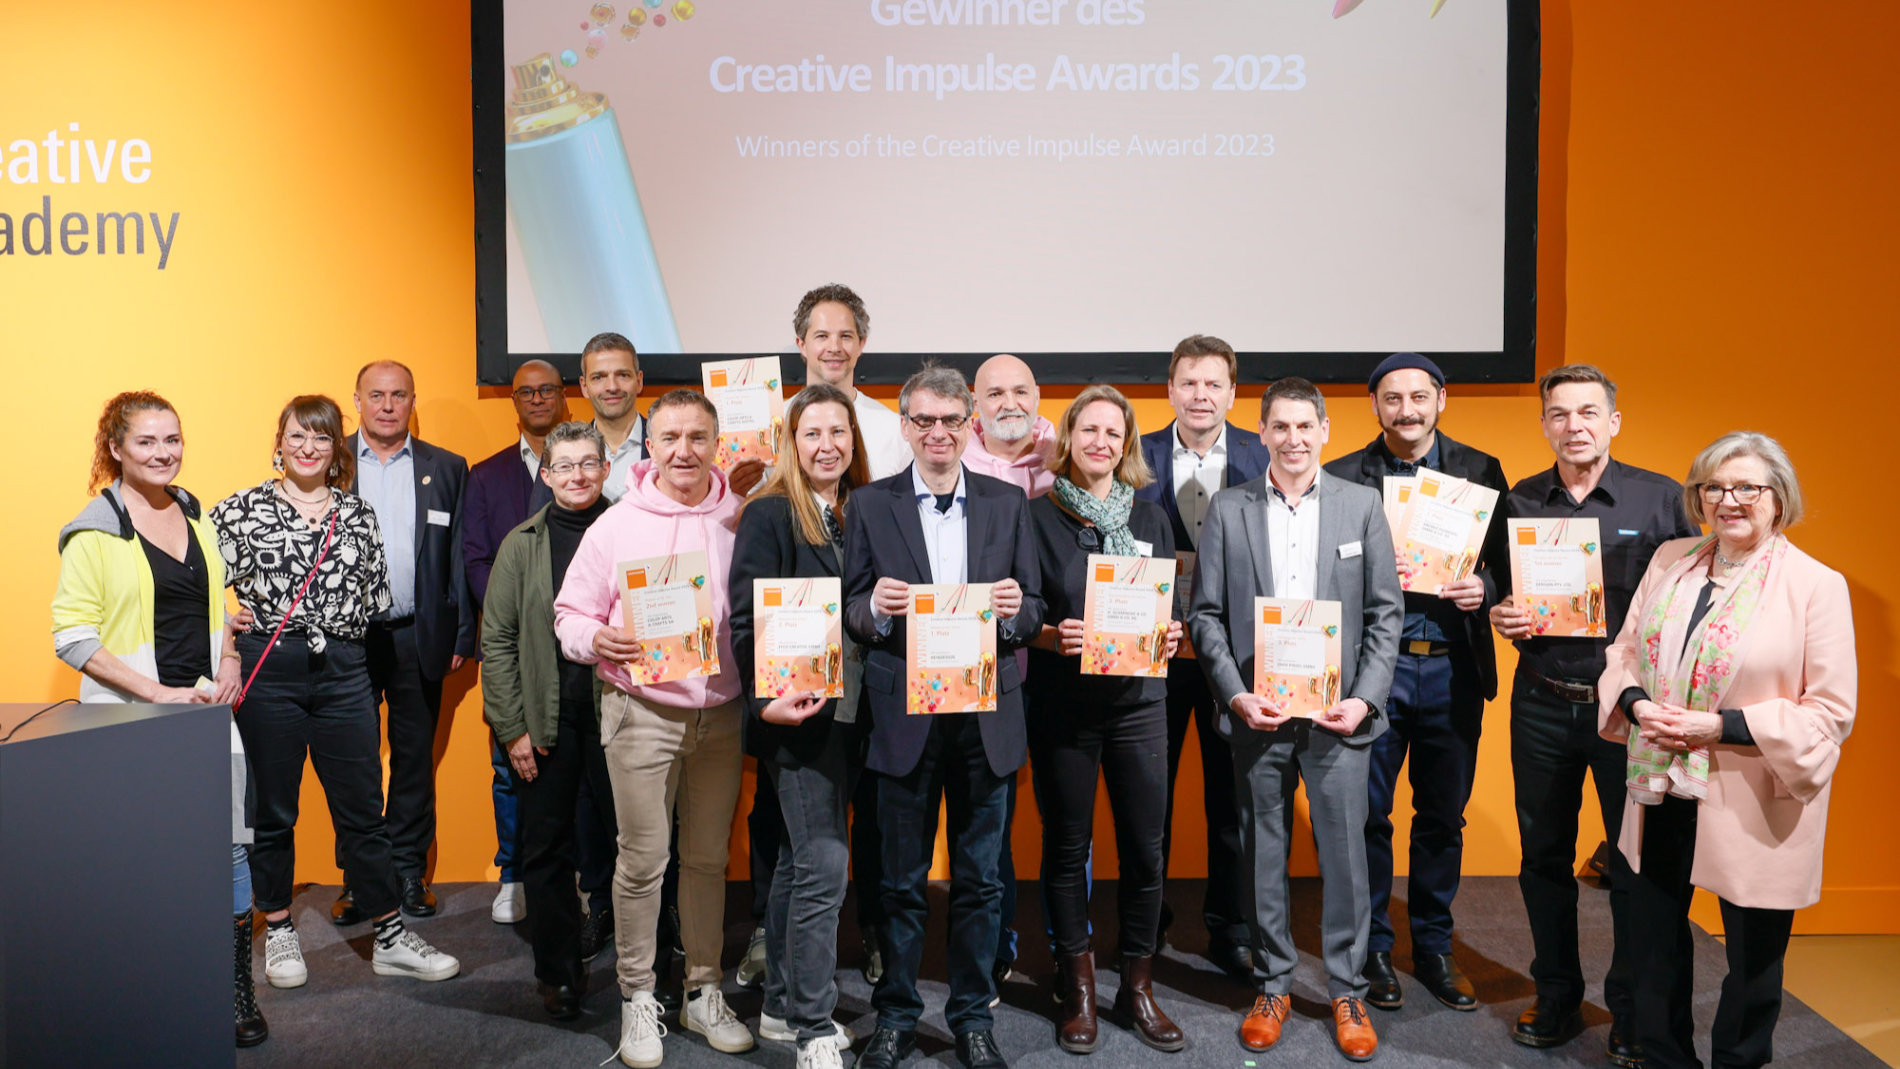 These are the winners of the Creative Impulse Awards 2023. Image: Messe Frankfurt/Jean-Luc Valentin